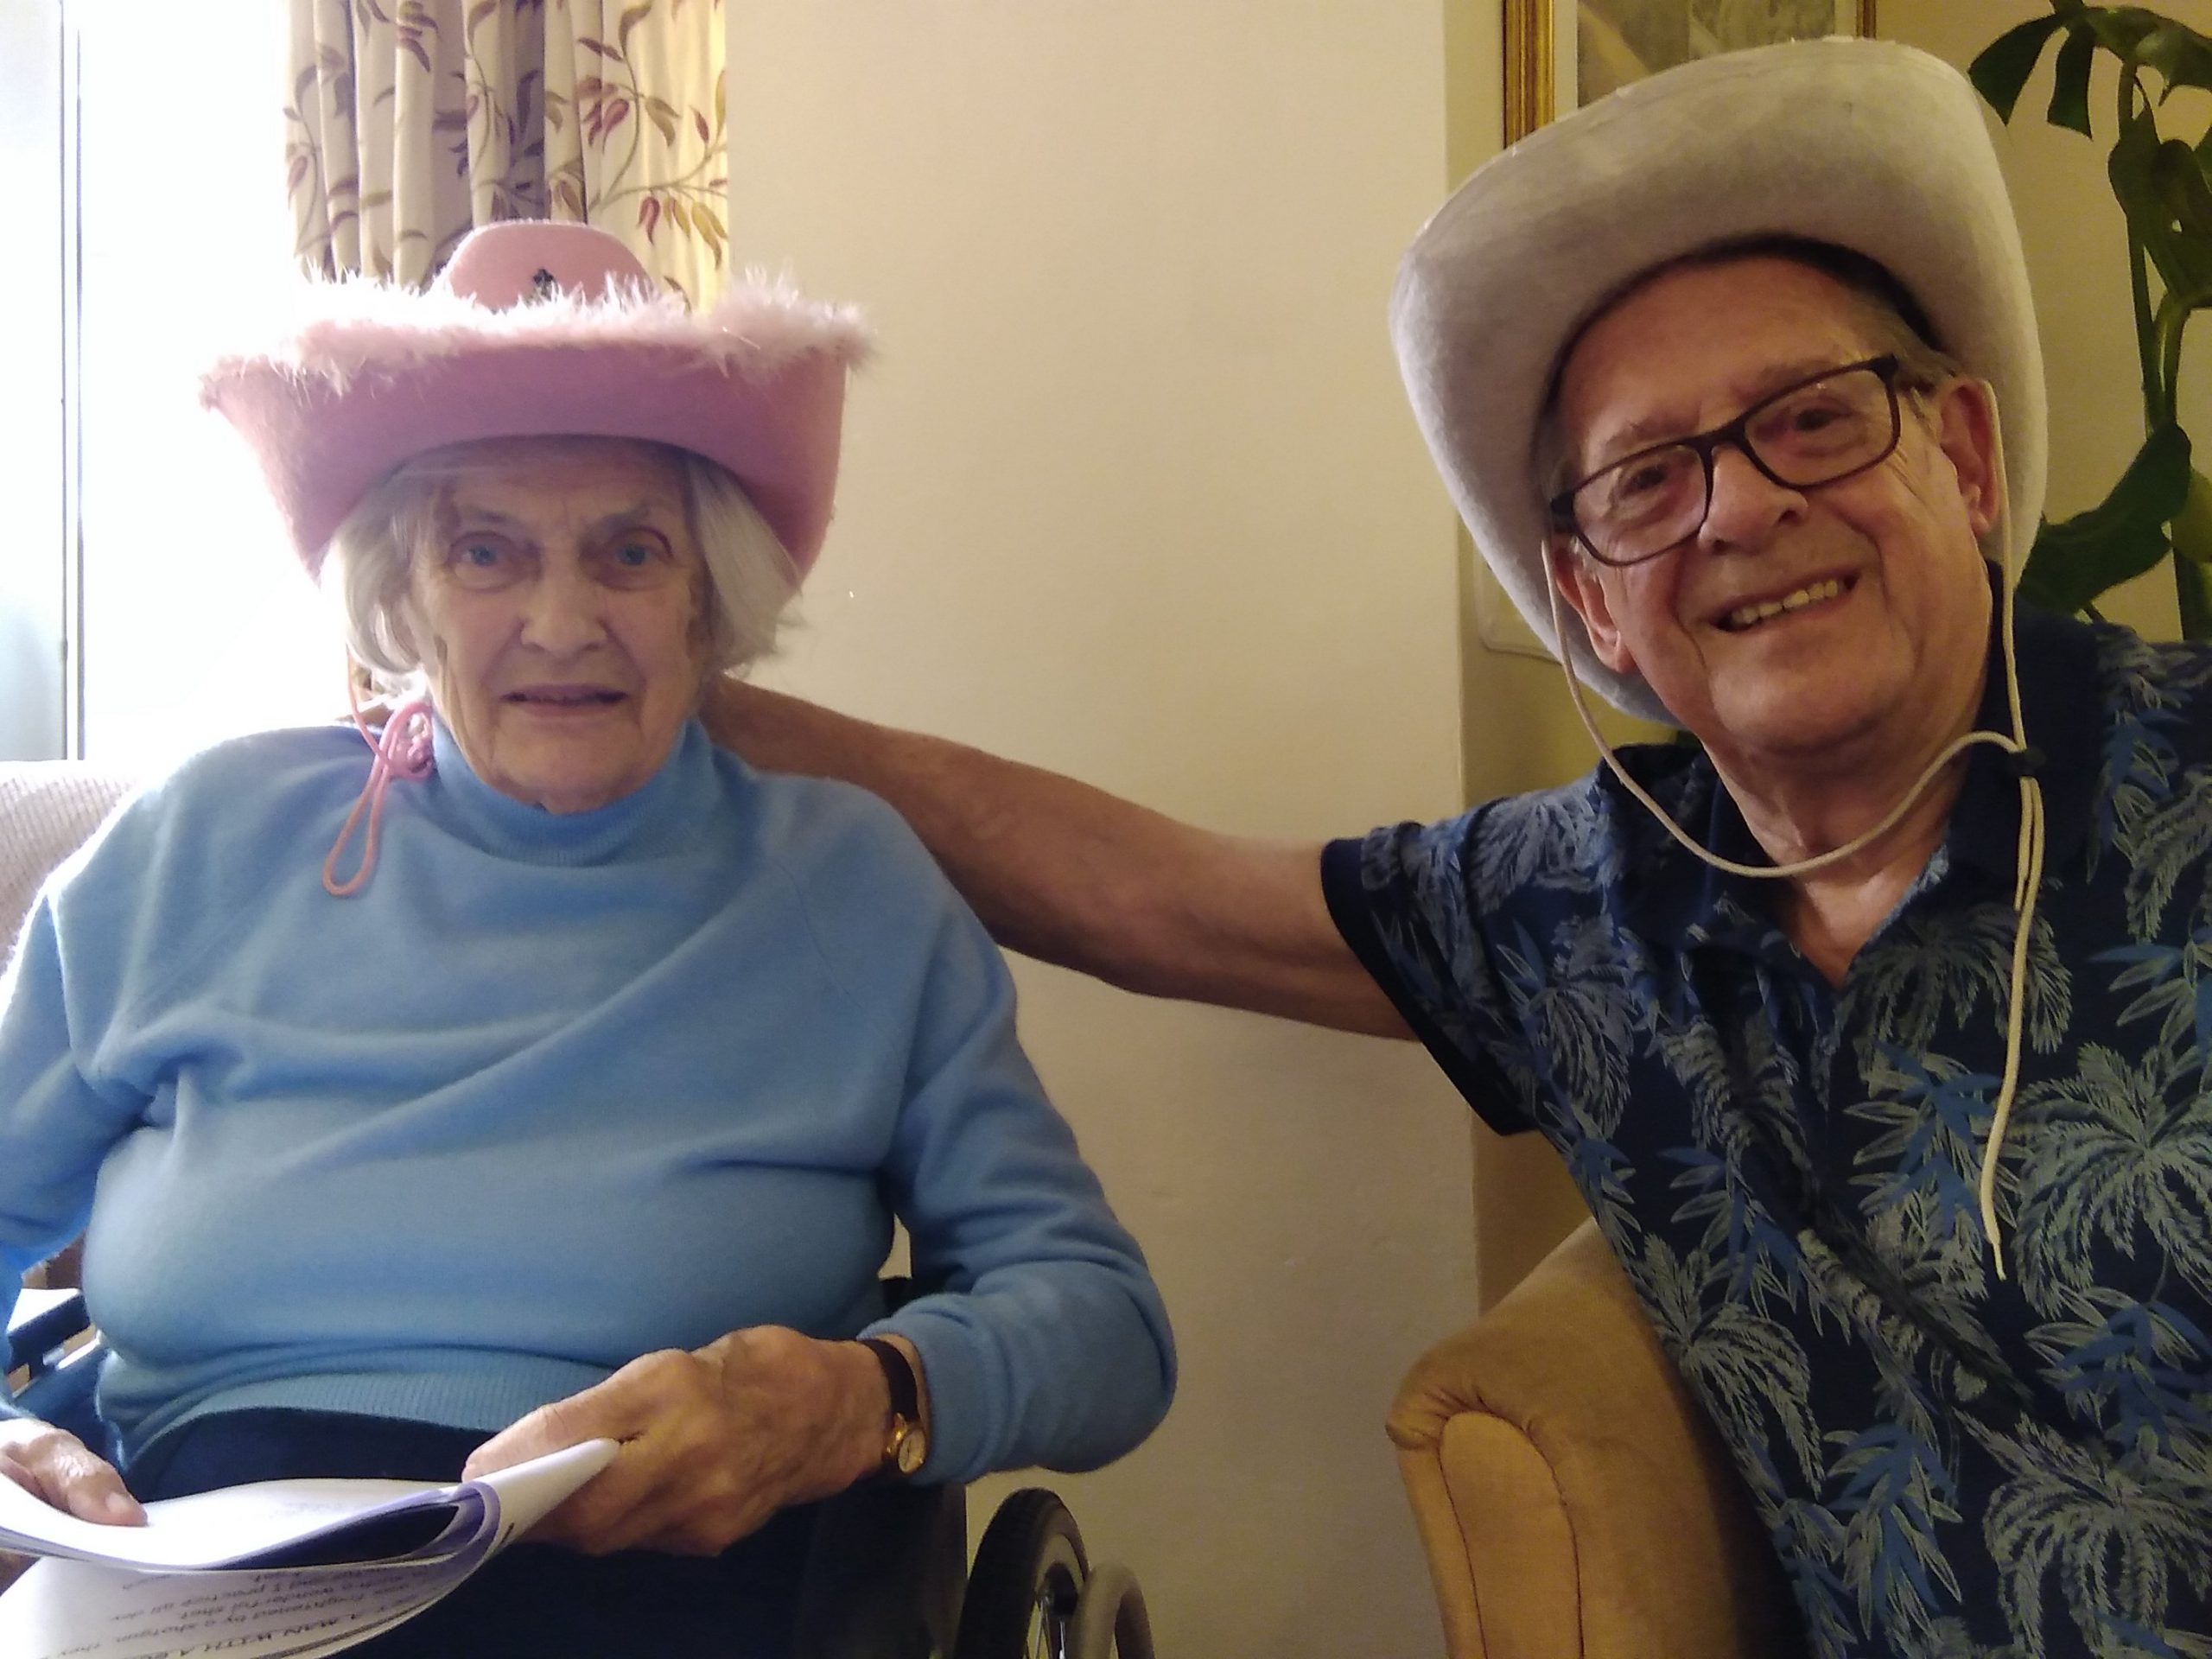 Our residents at our Wild West entertainment afternoon